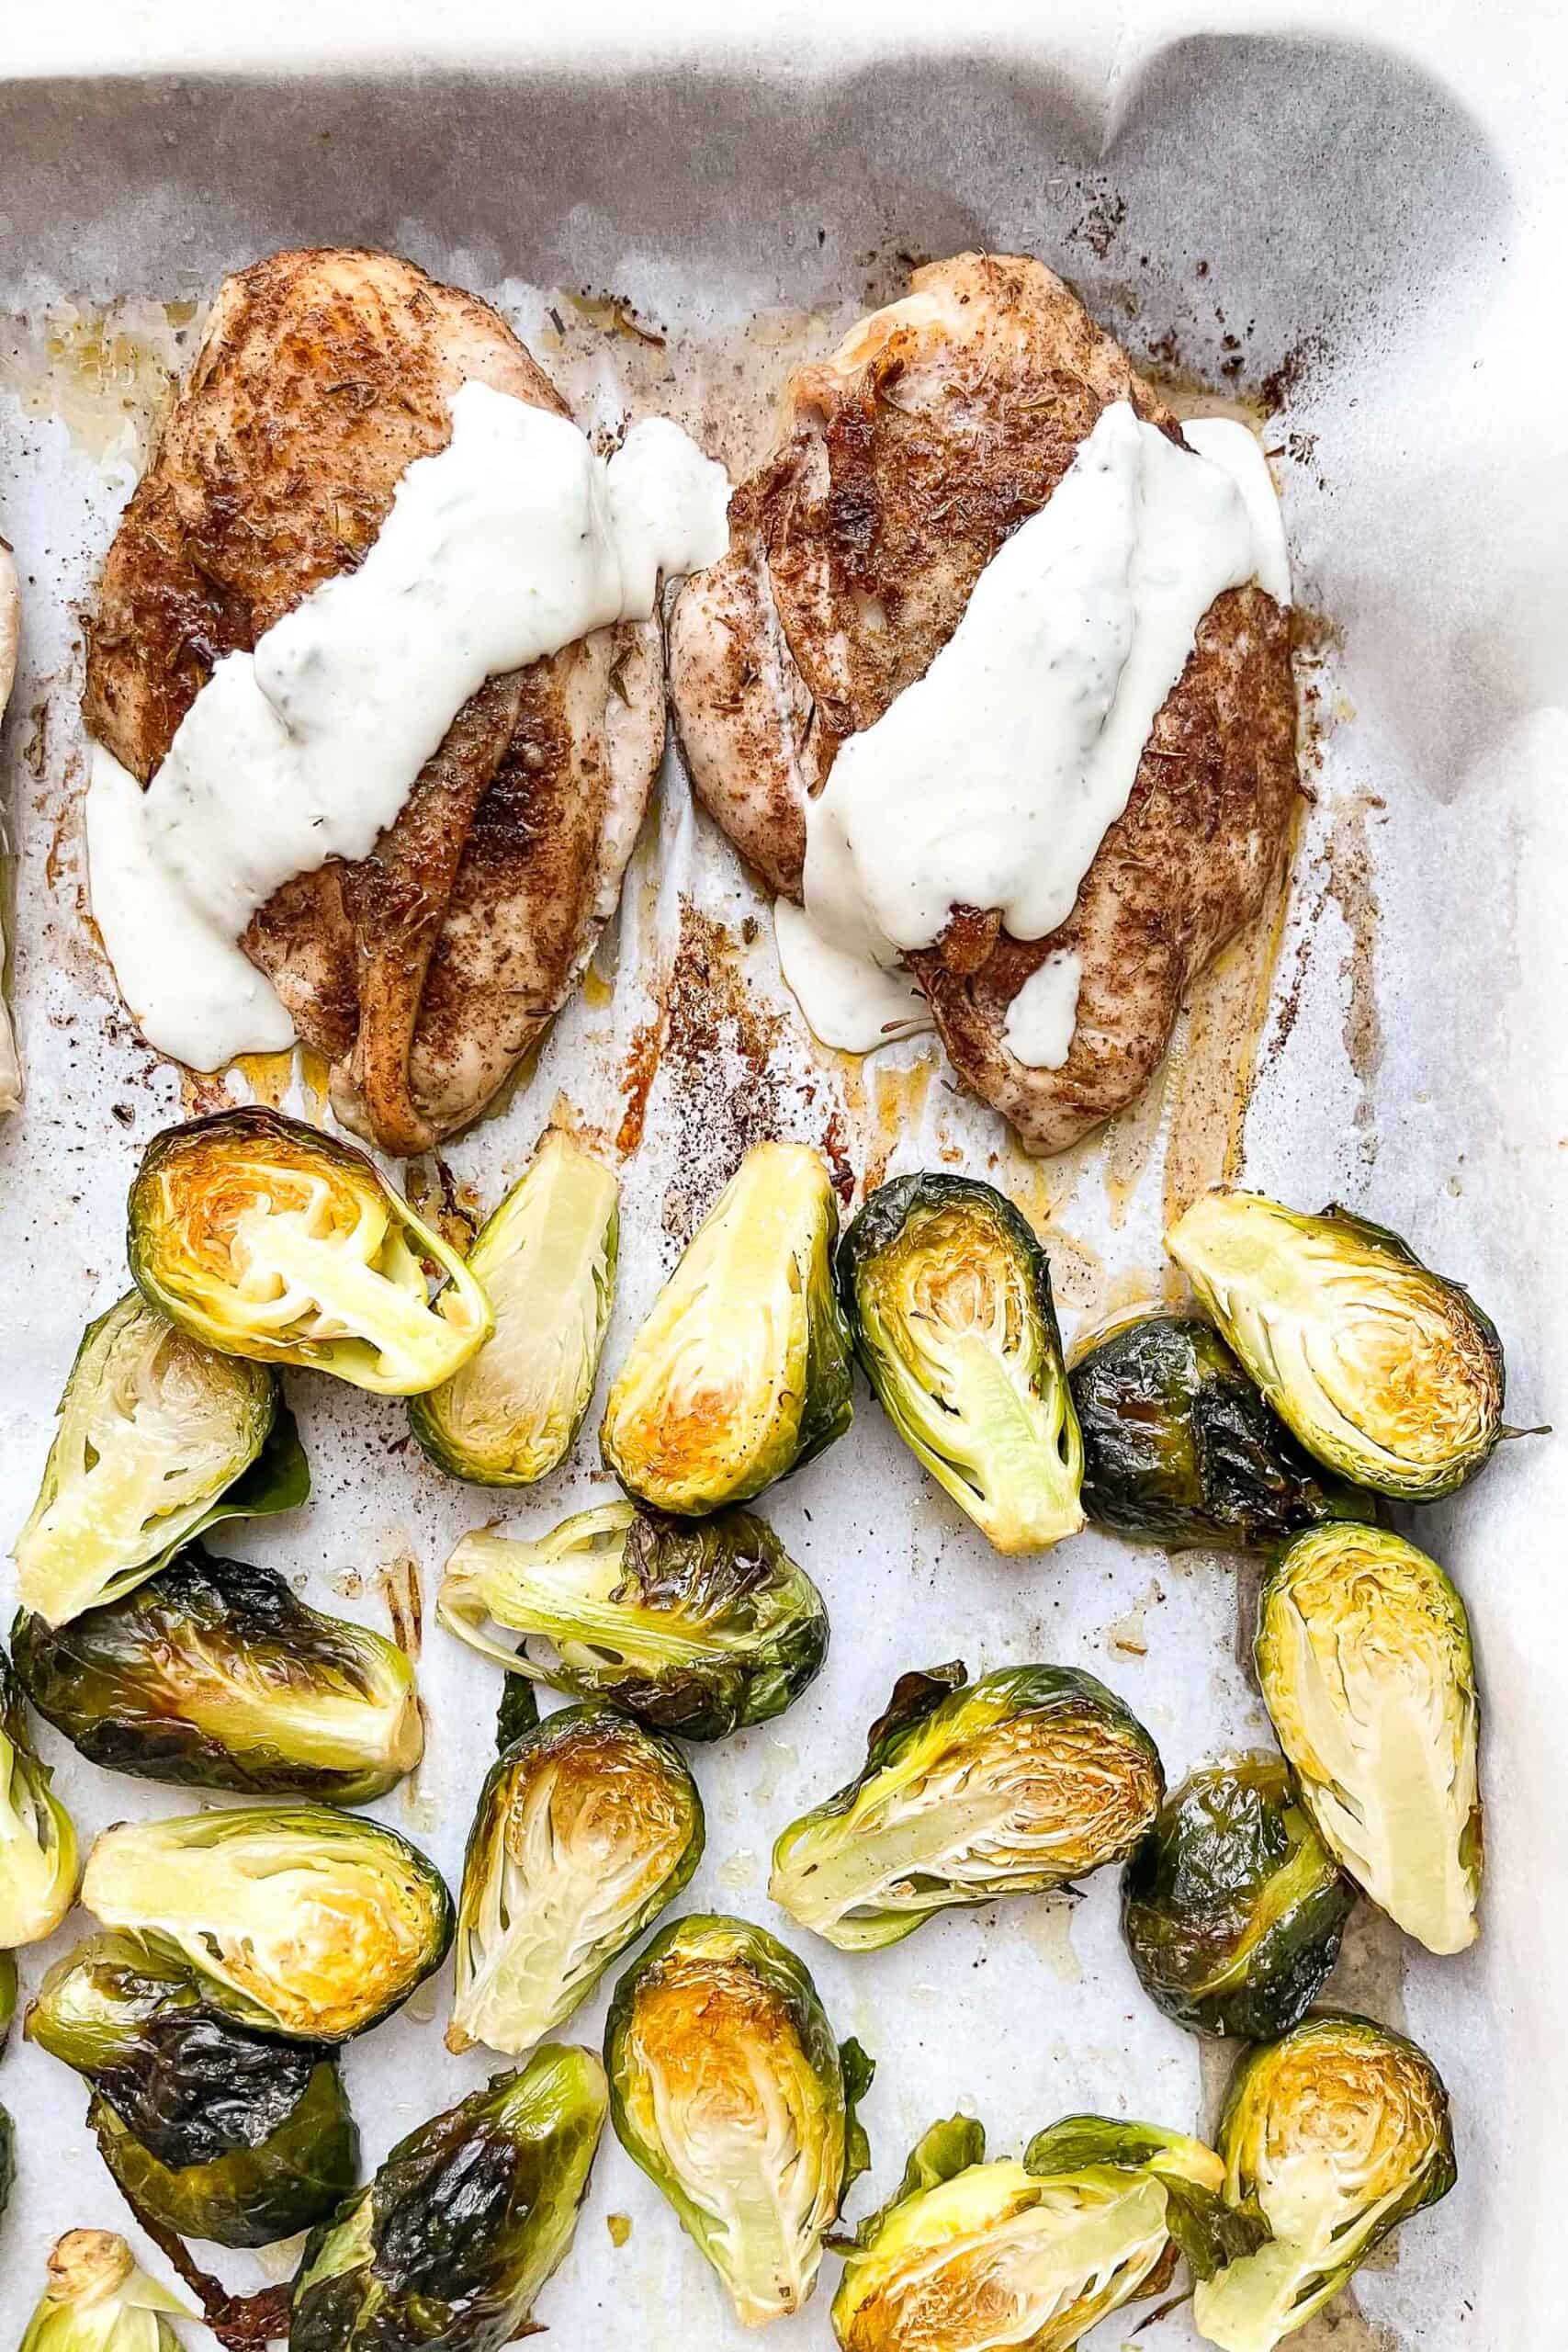 jerk seasoned chicken on a sheet pan with brussels sprouts